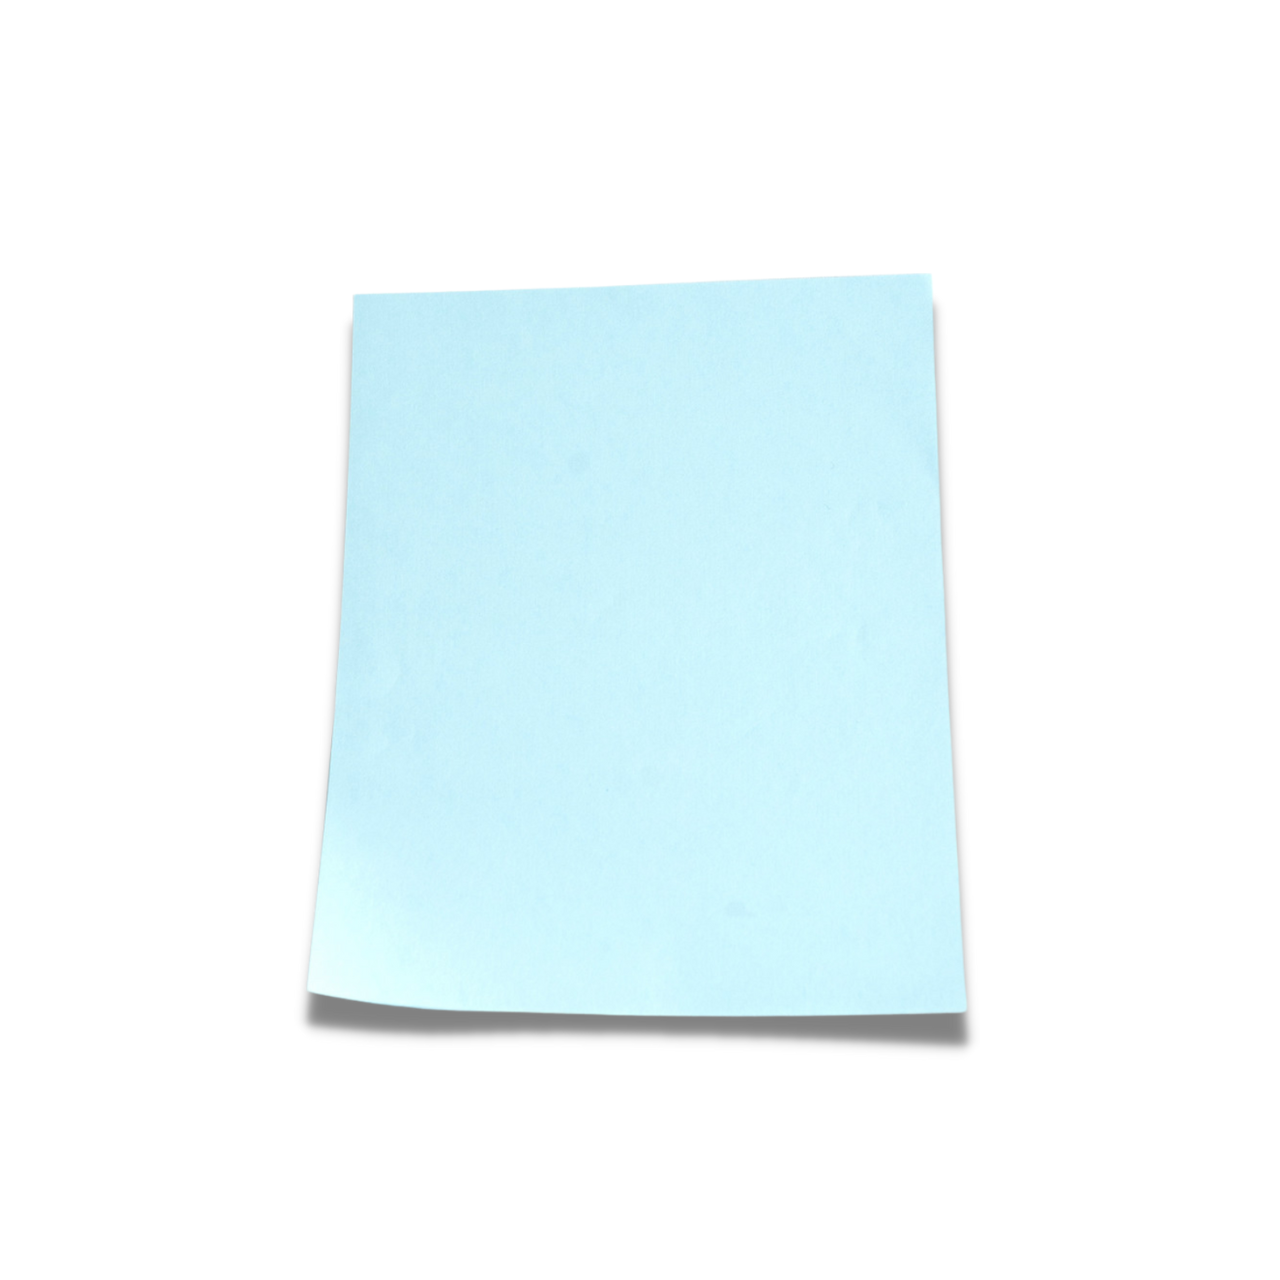 Cleanroom Paper: 8.5x11, White, Autoclavable, 22#, 250 Sheets/Pack- 10  Packs/Case, LT-8511-22W